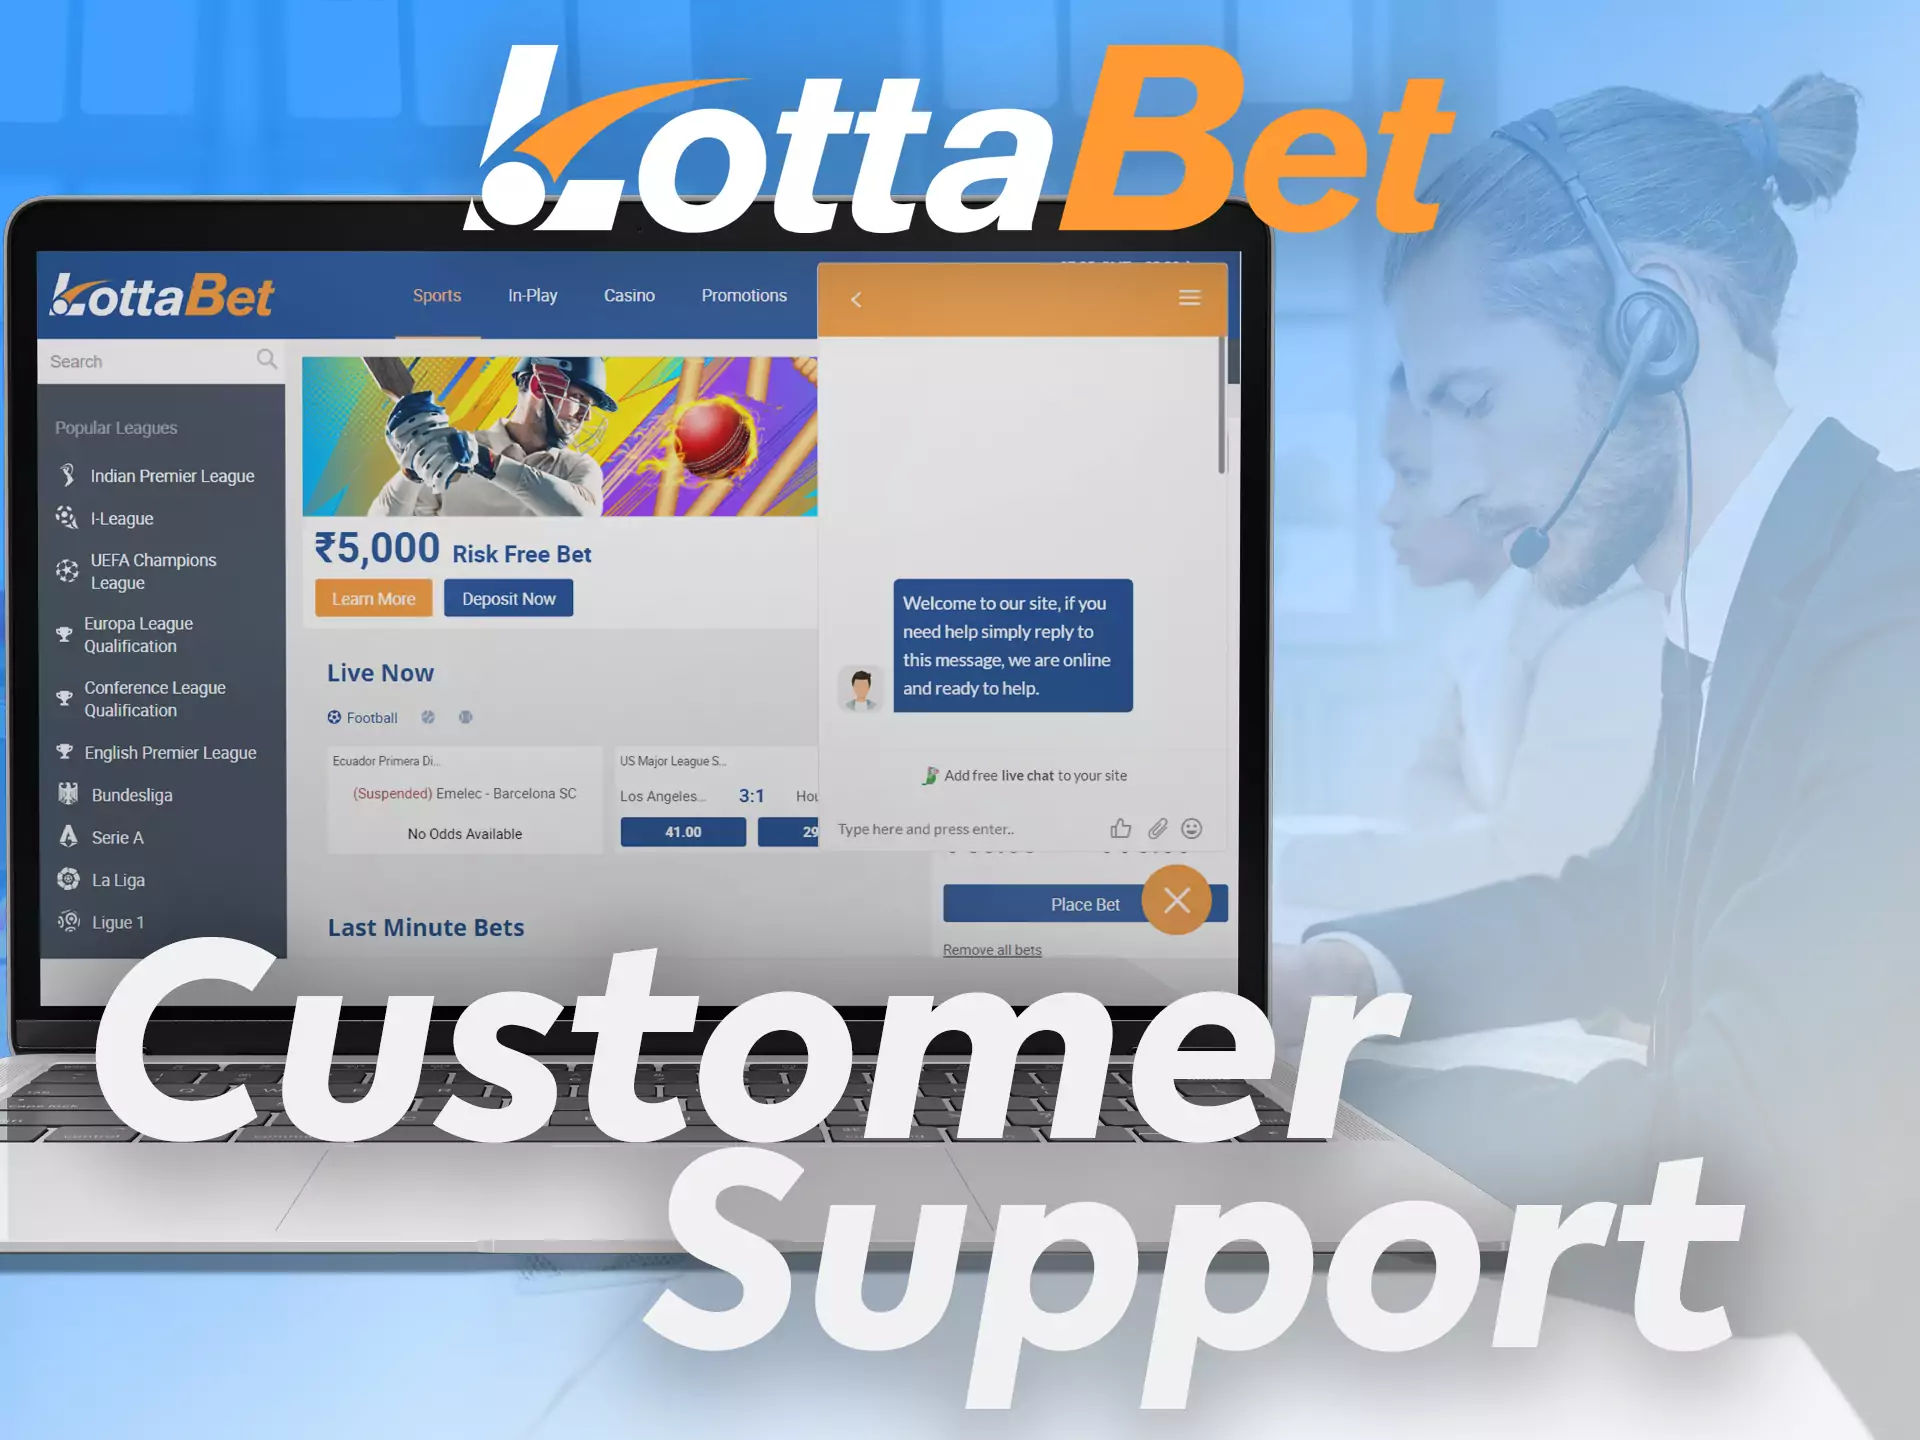 Ask Lottabet customer support if you have any questions about using the site.